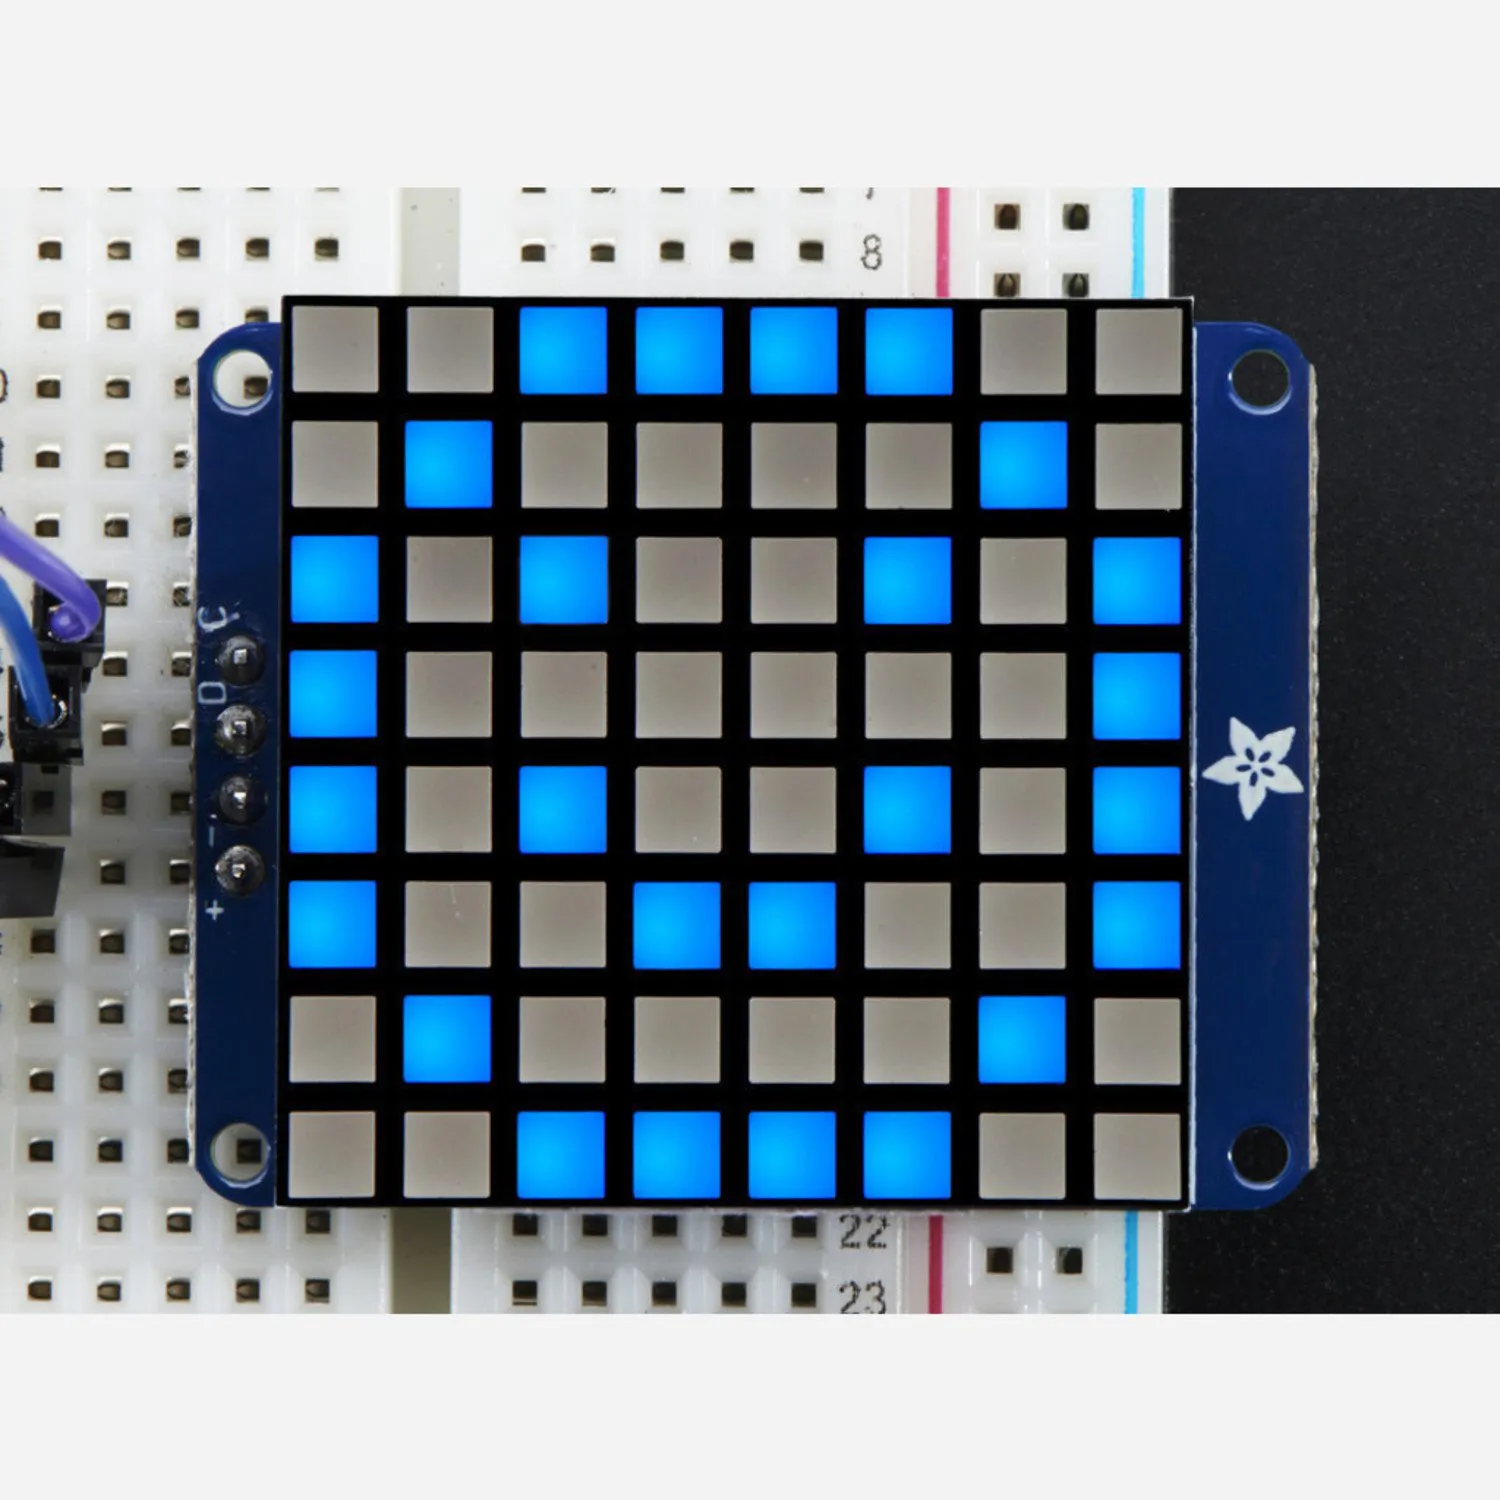 Photo of Small 1.2 8x8 Bright Square LED Matrix + Backpack - Blue